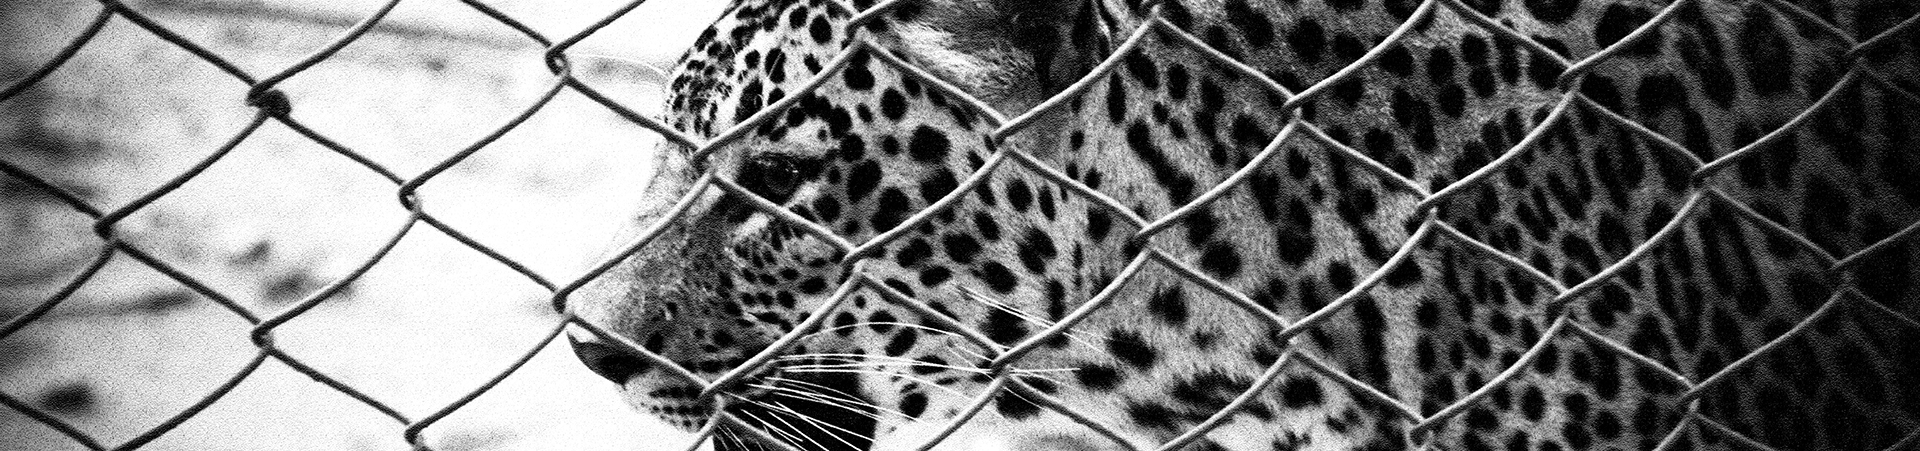 caged leopard